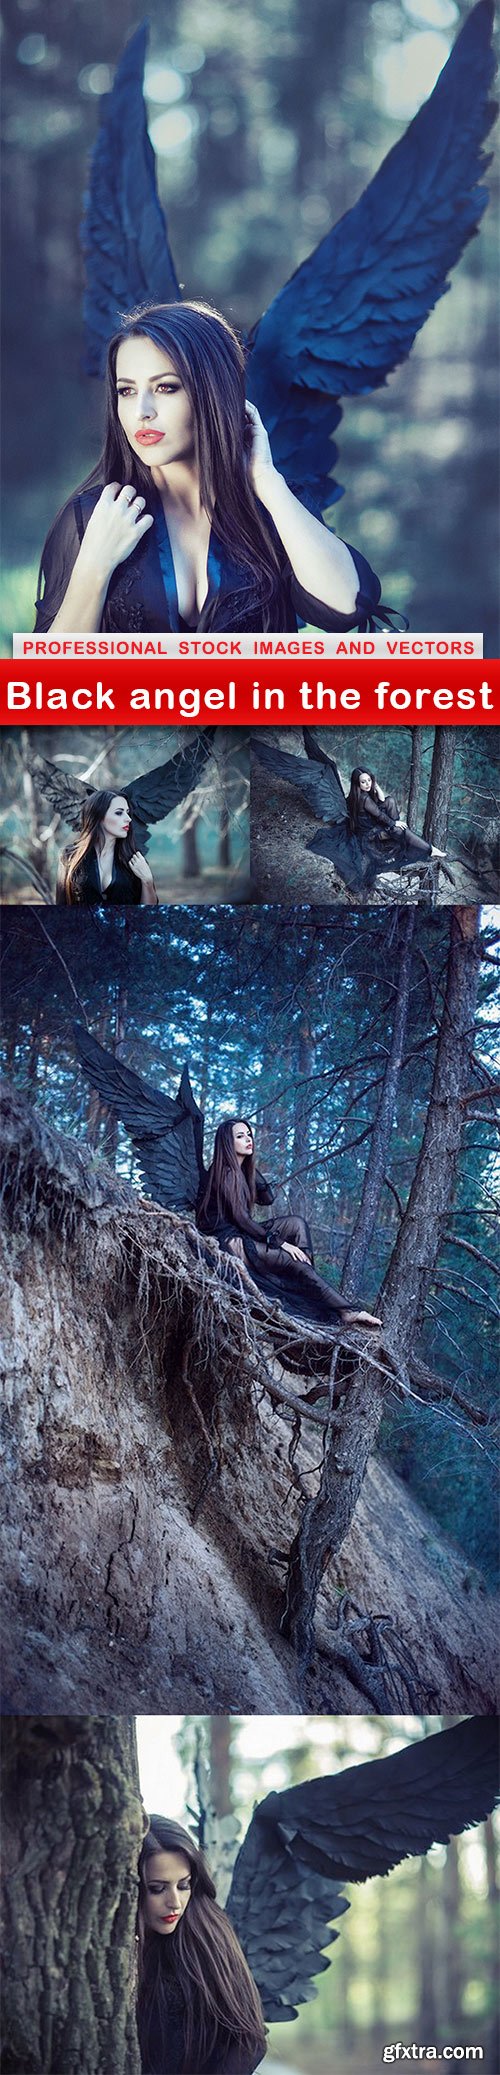 Black angel in the forest - 5 UHQ JPEG